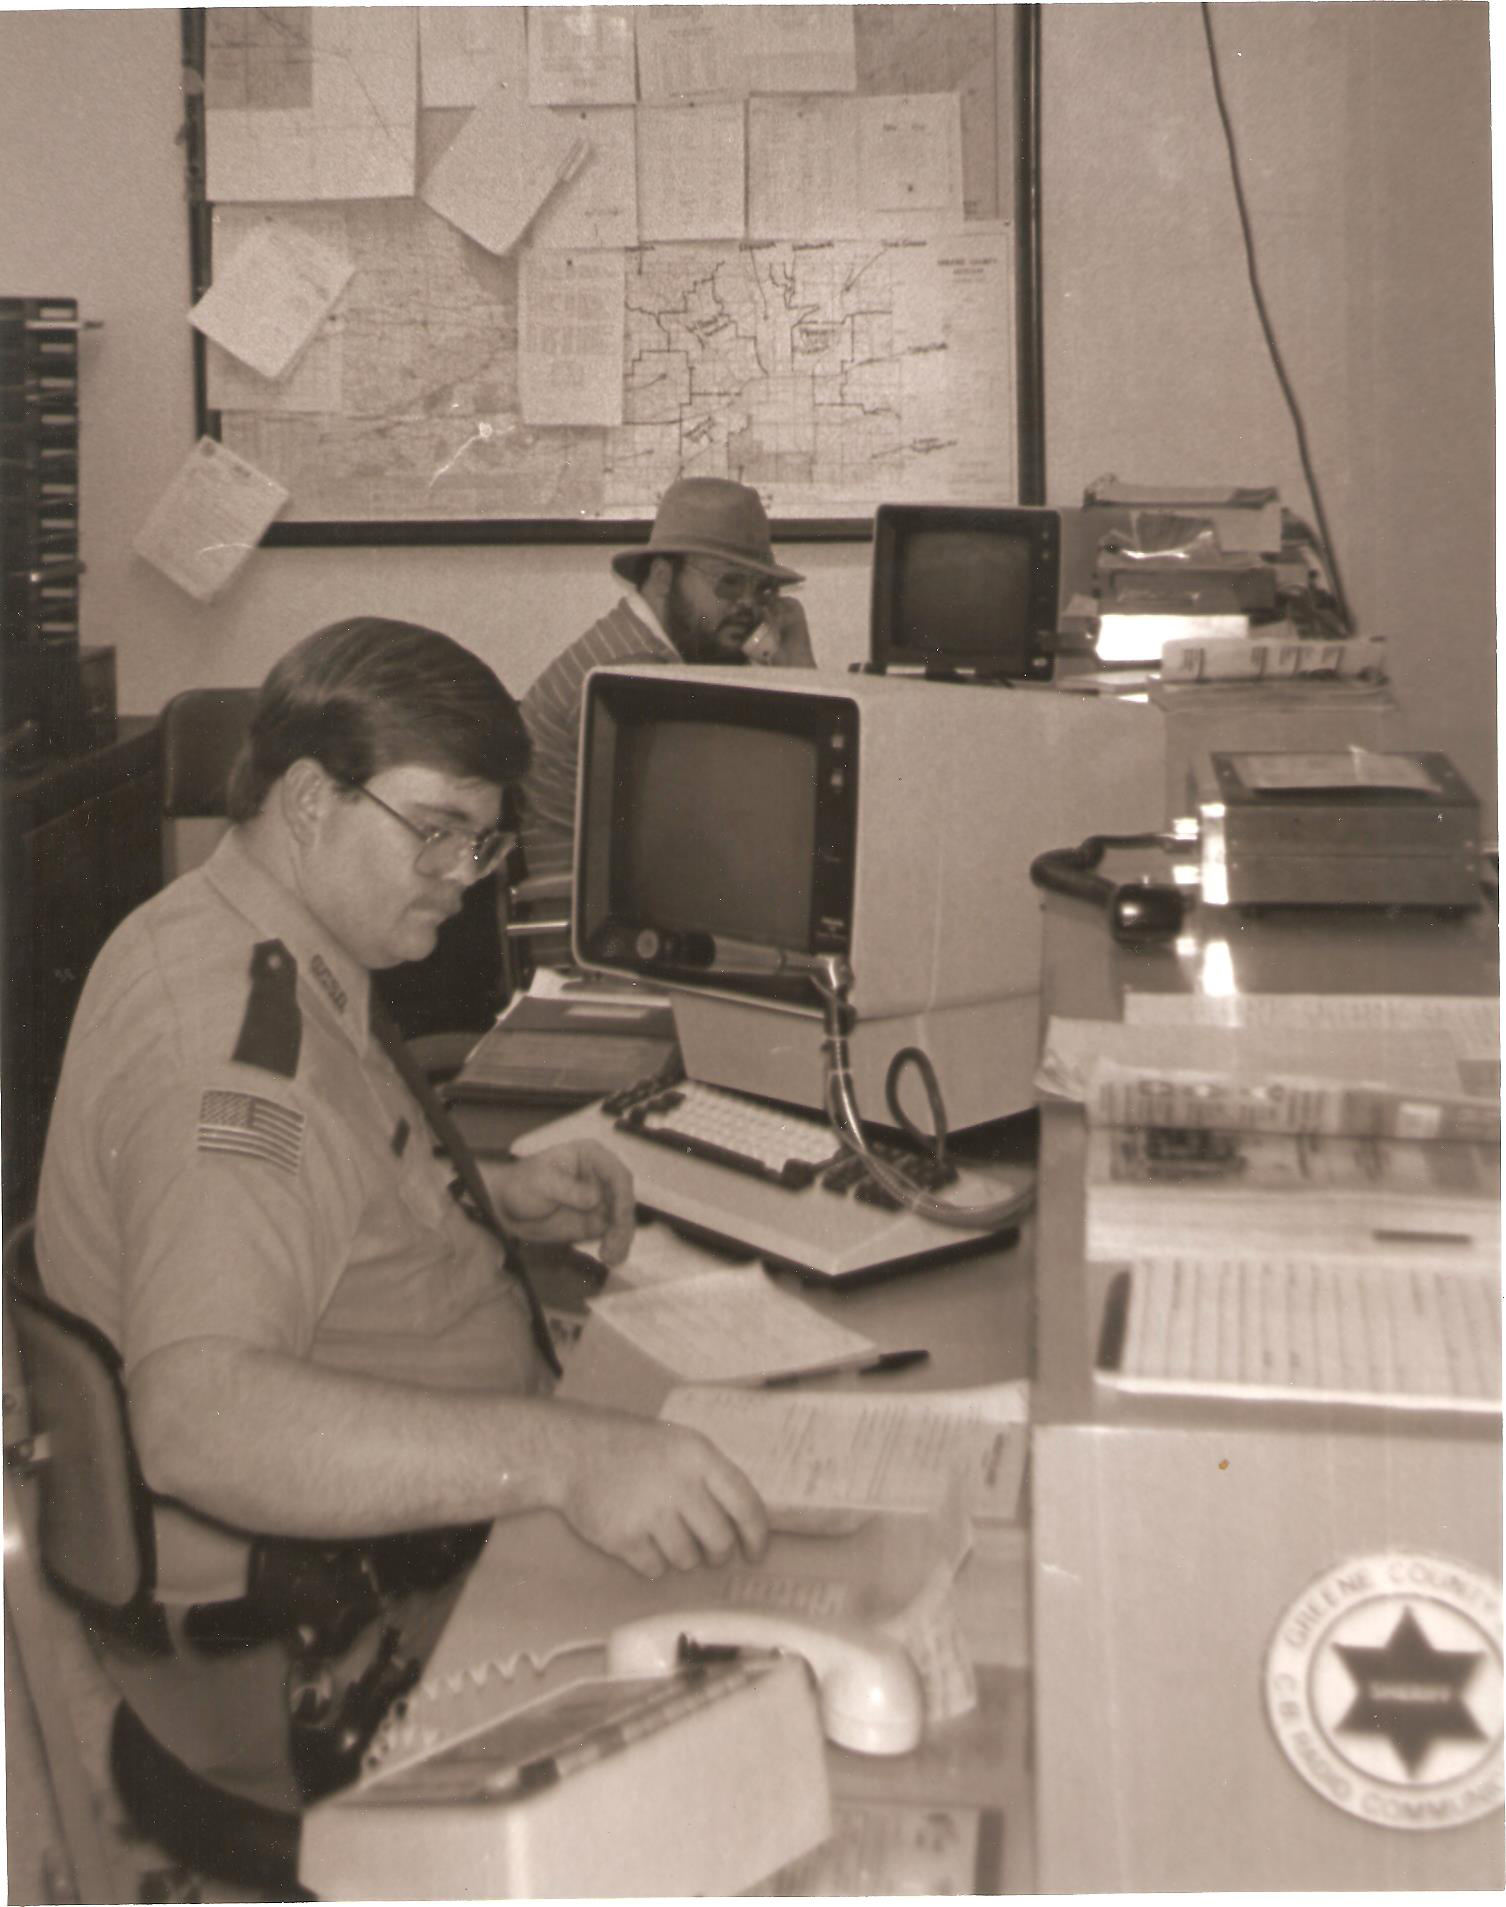 Working behind the radio console at the Greene County Sheriff's Department alongside fellow Deputy Sheriff Morris D. "Sonny" Jarvis. circa 1987